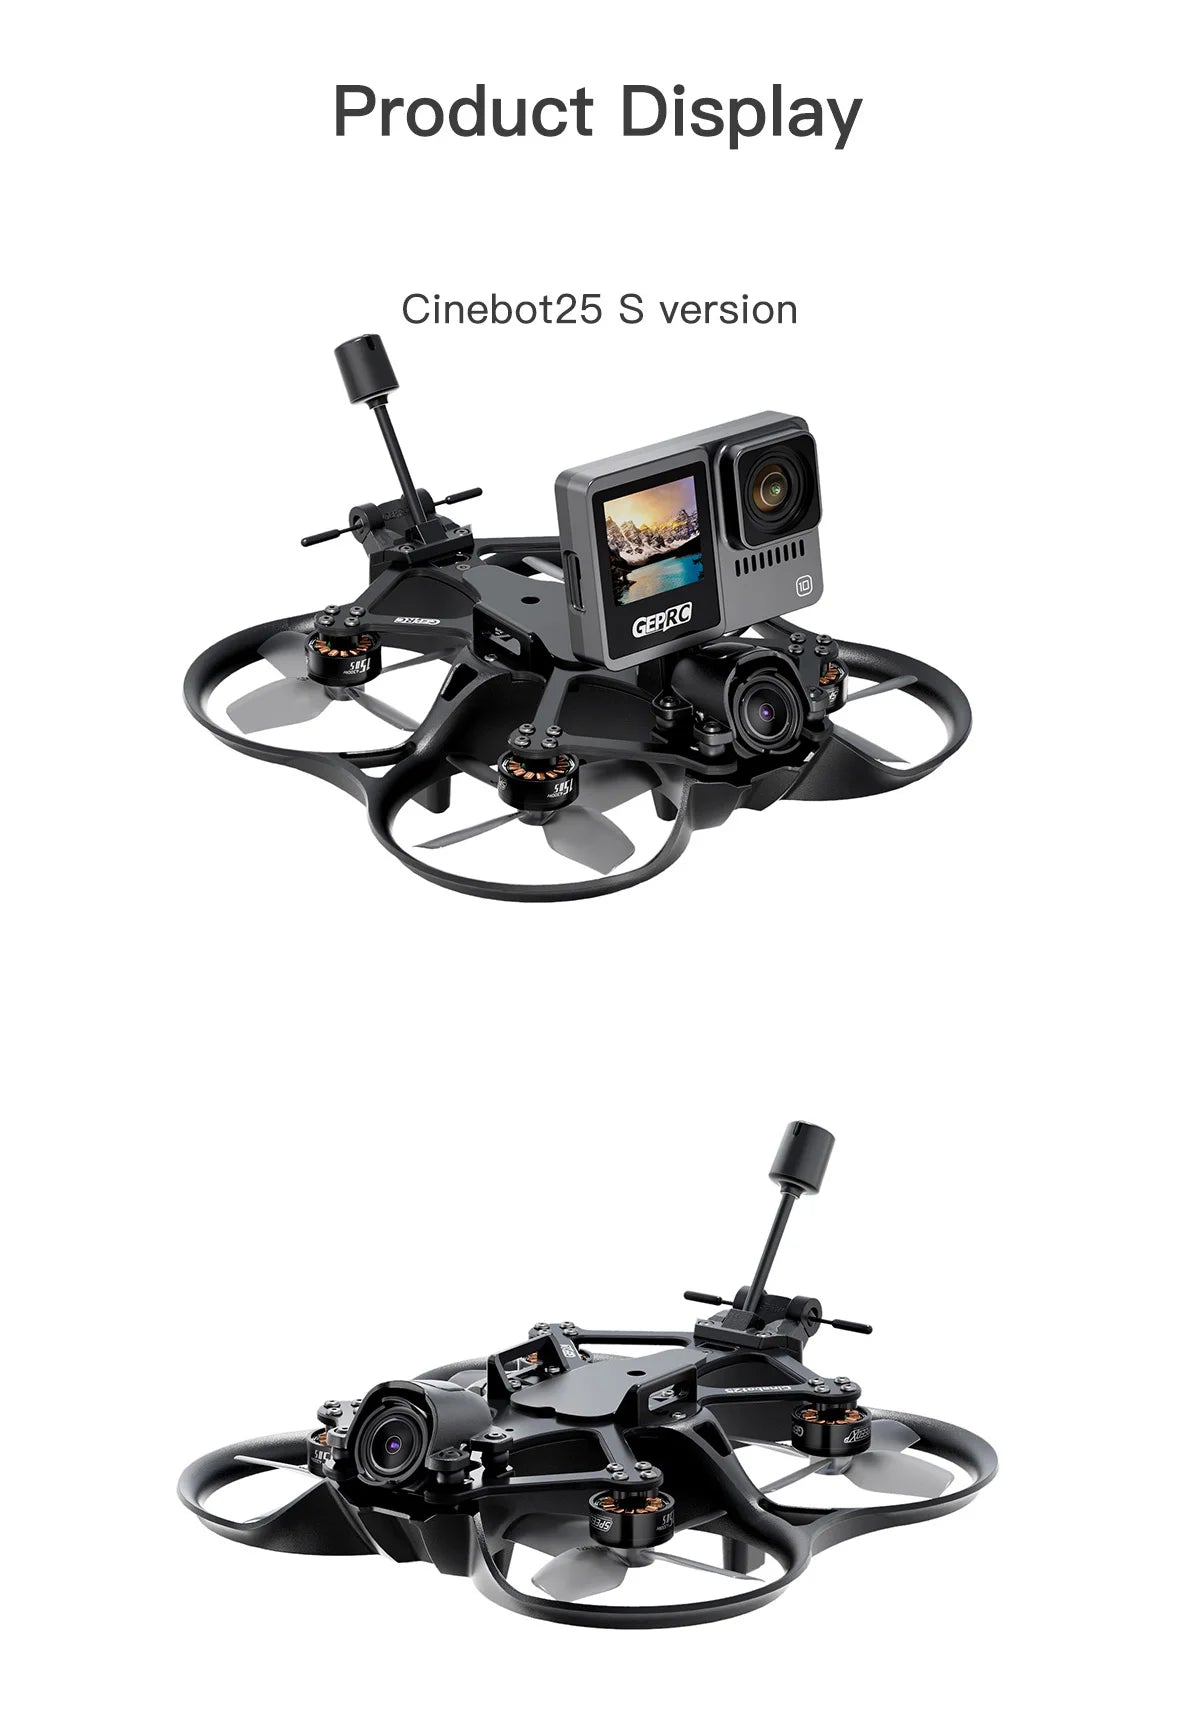 GEPRC Cinebot25 S WTFPV 2.5inch FPV Drone, GEPRO Cinebot25 S version S451 